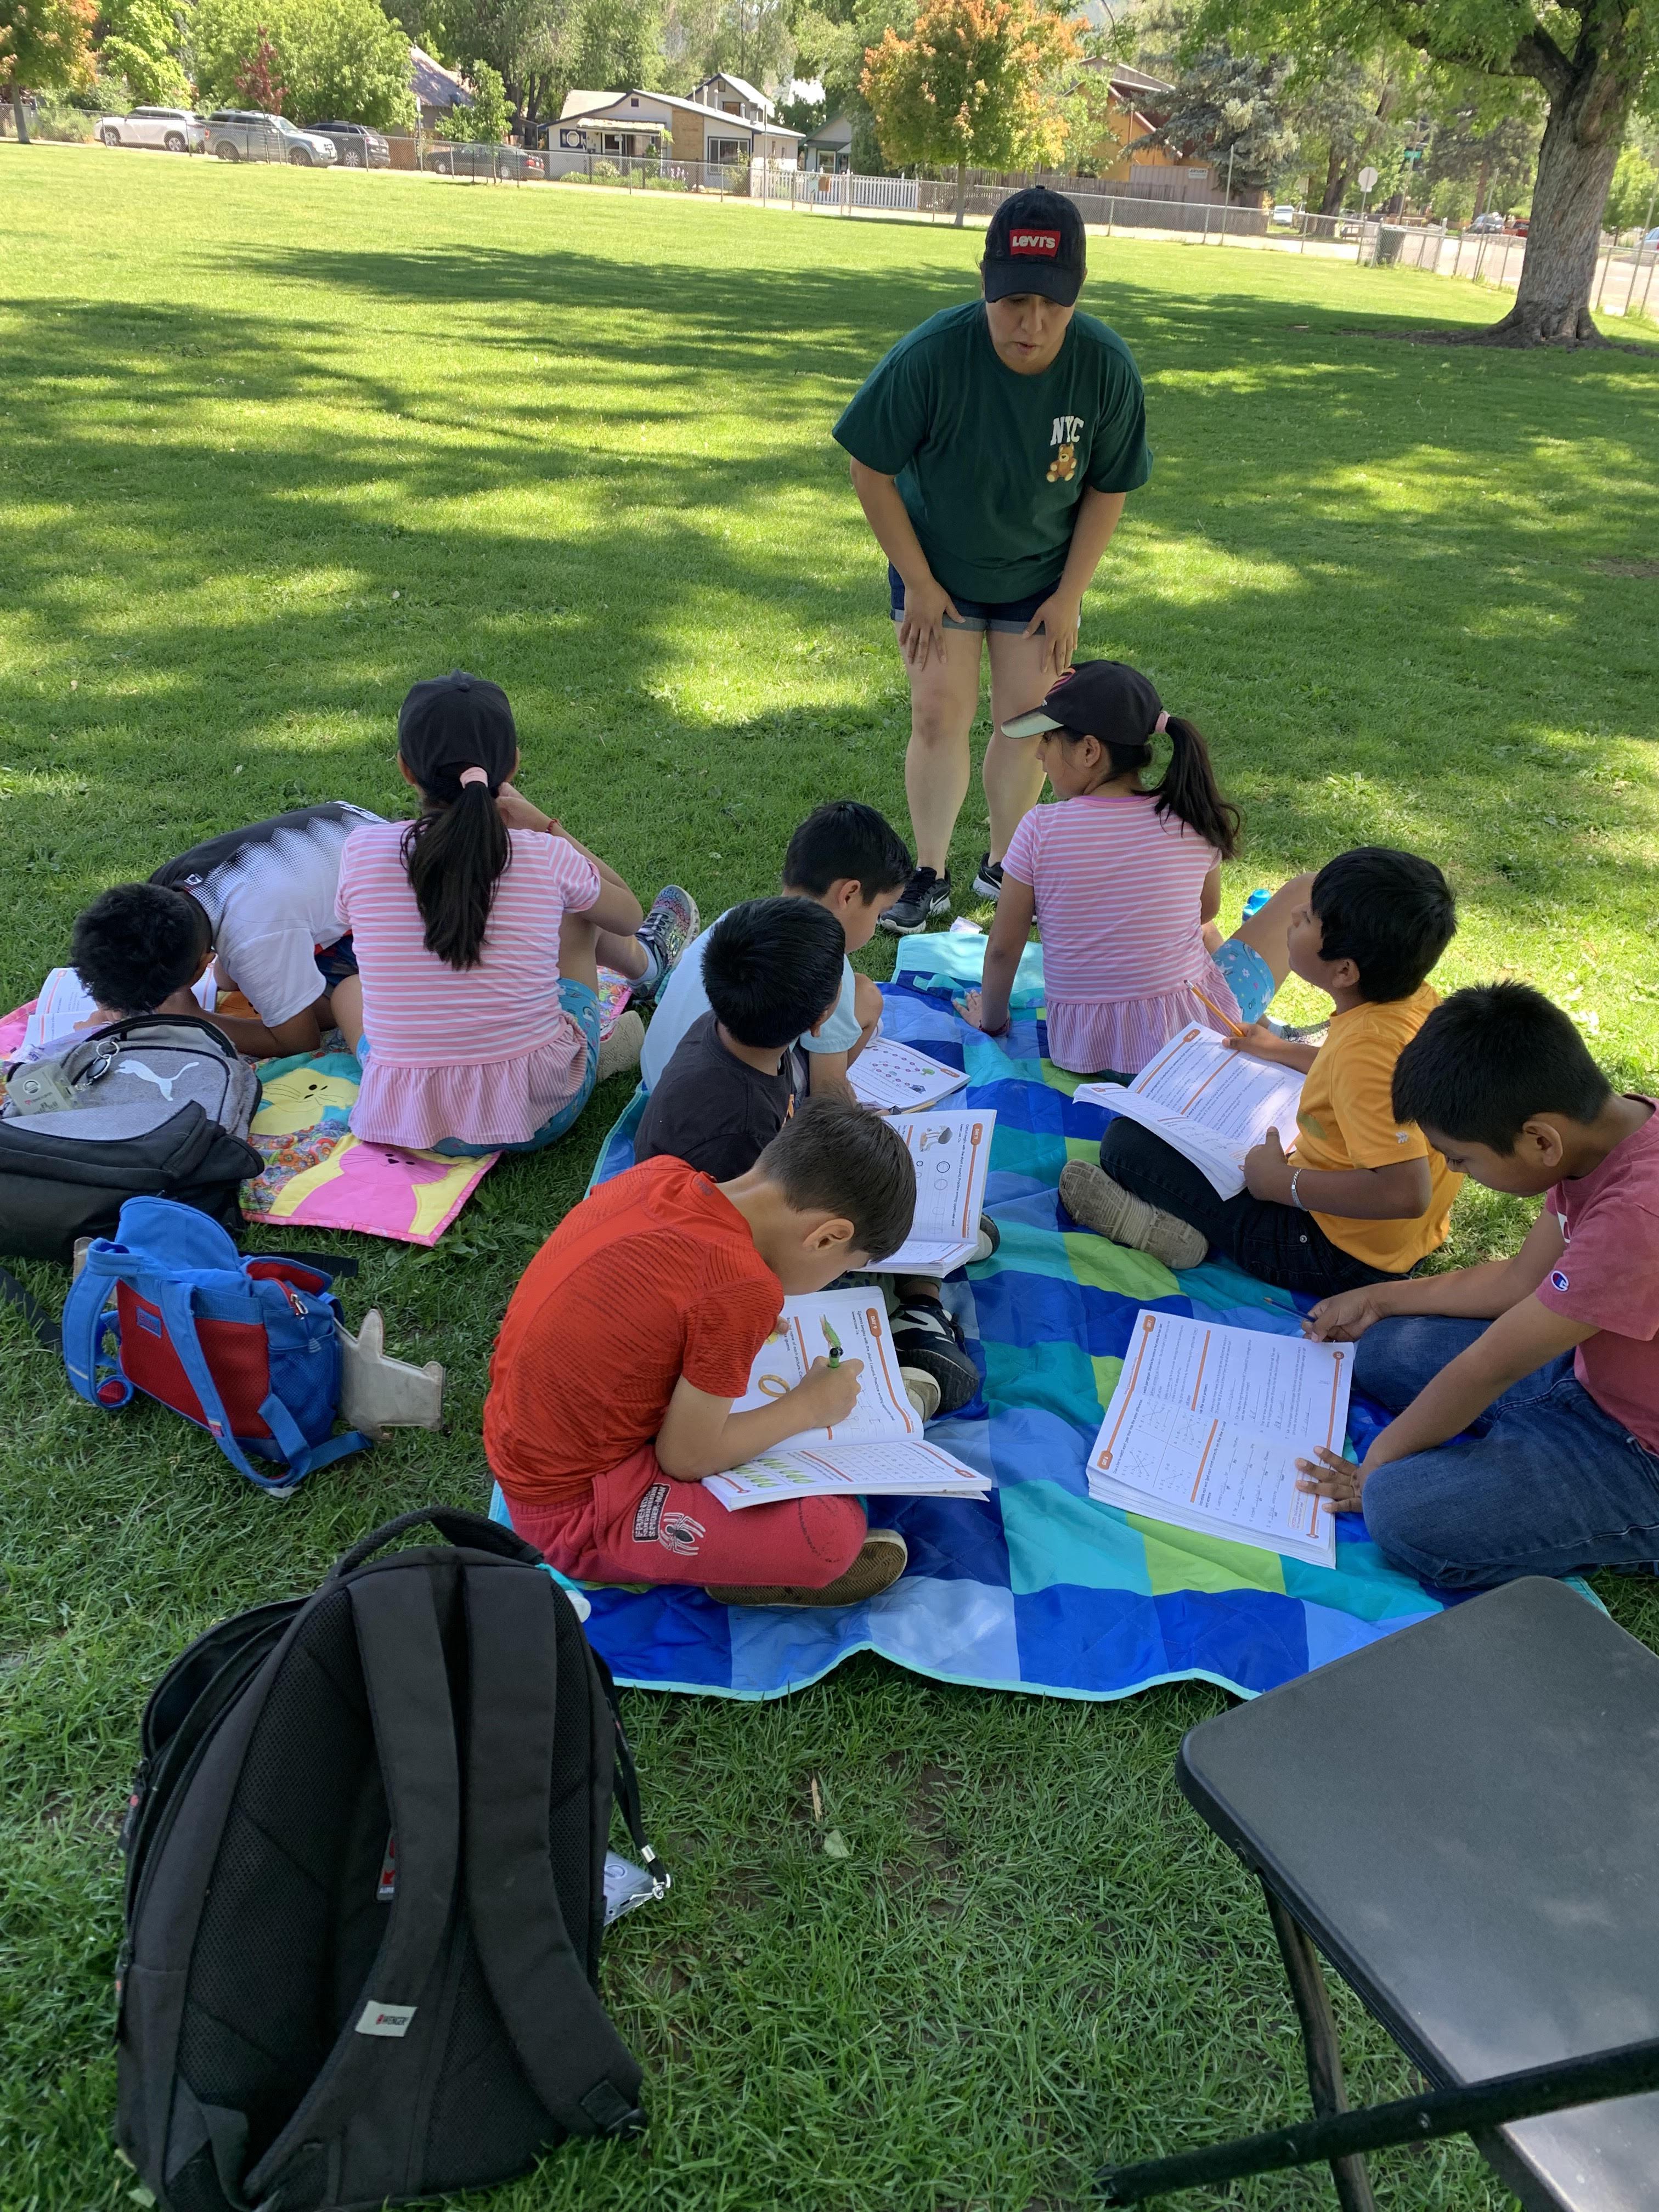 several students reading books in park